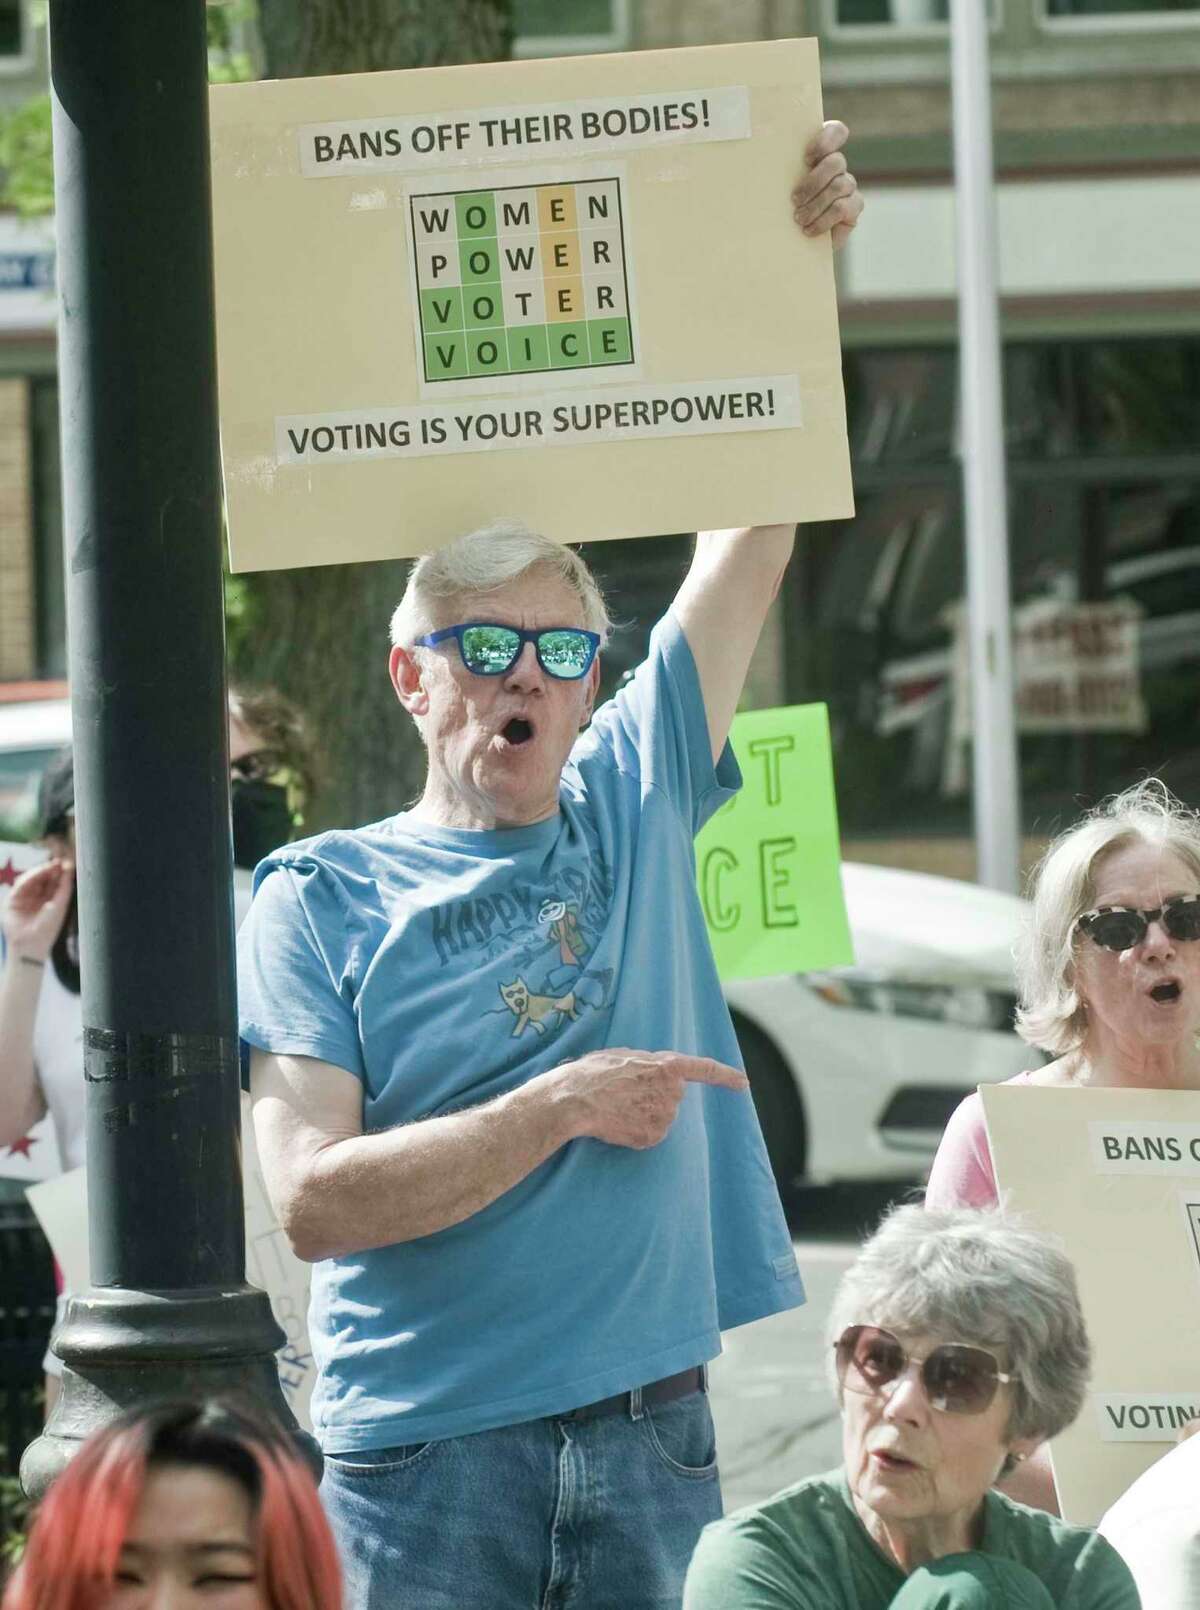 John McCartney, of New Fairfield, expresses his opinion during the rally in support of abortion rights, at the Danbury Library Plaza. Sunday, May 15, 2022